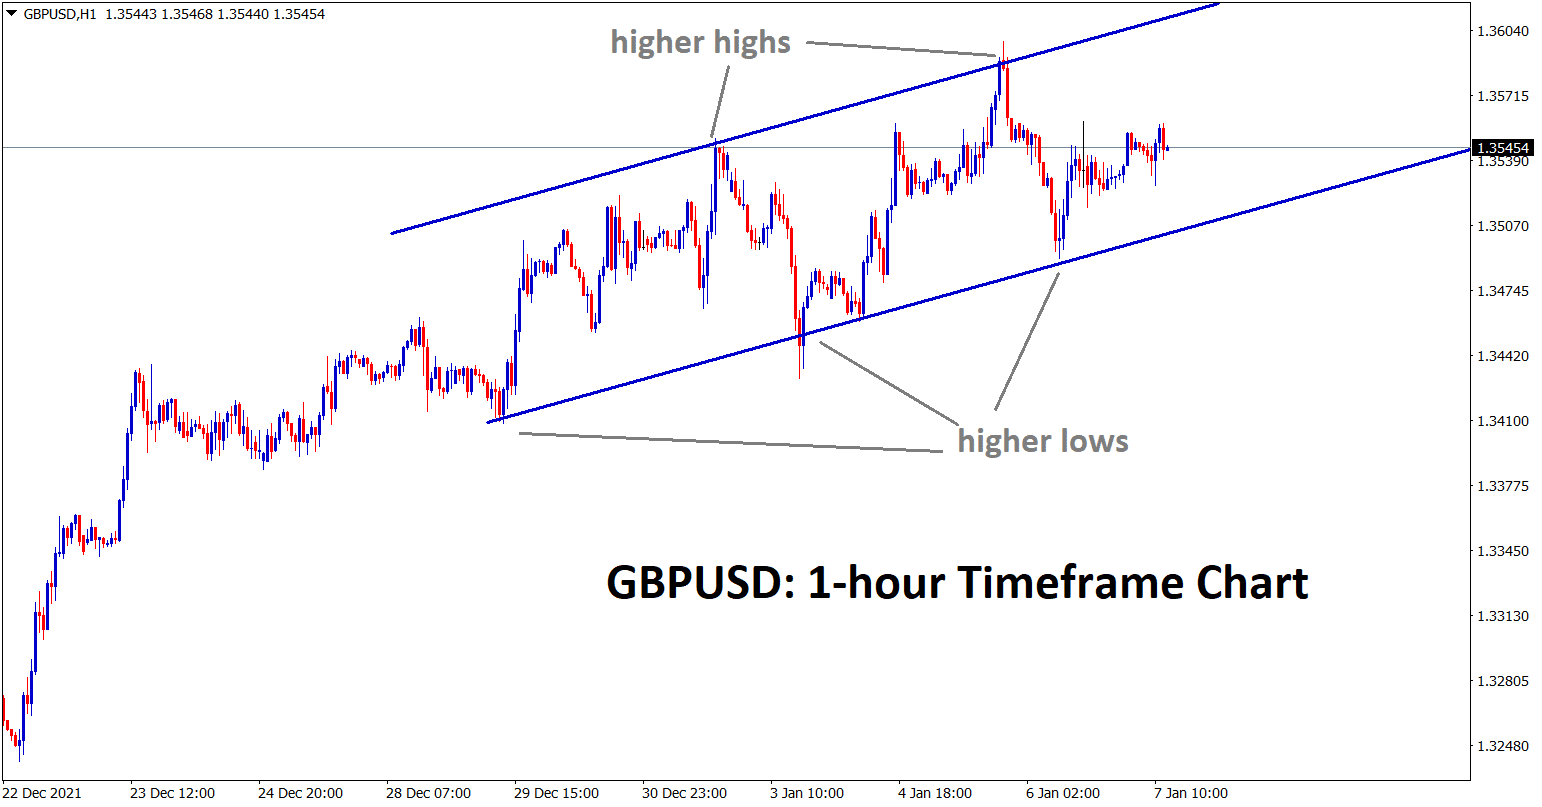 GBPUSD is moving in an Uprend forming higher highs and higher lows in the 1 hour timeframe chart